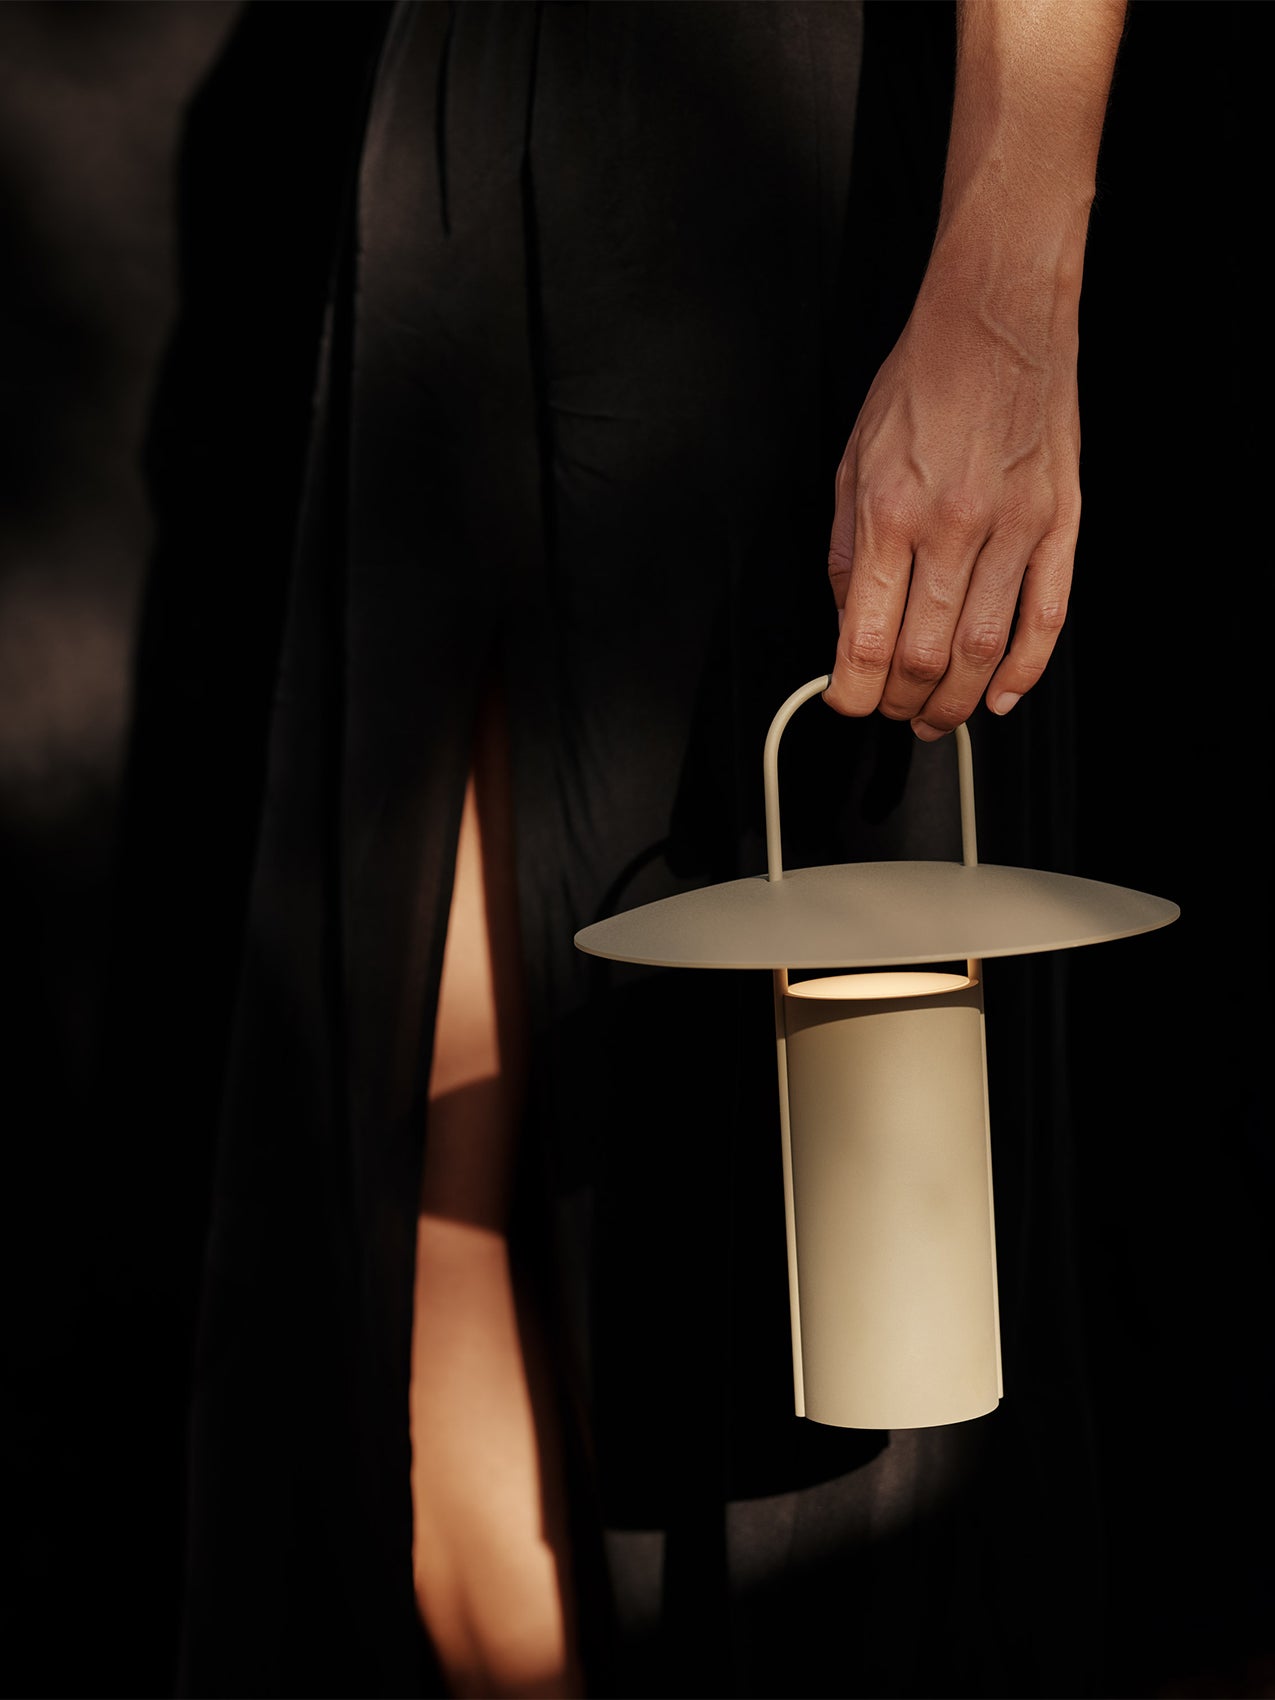 Ray Table Lamp, Portable  Unique table lamp by Daniel Schofield